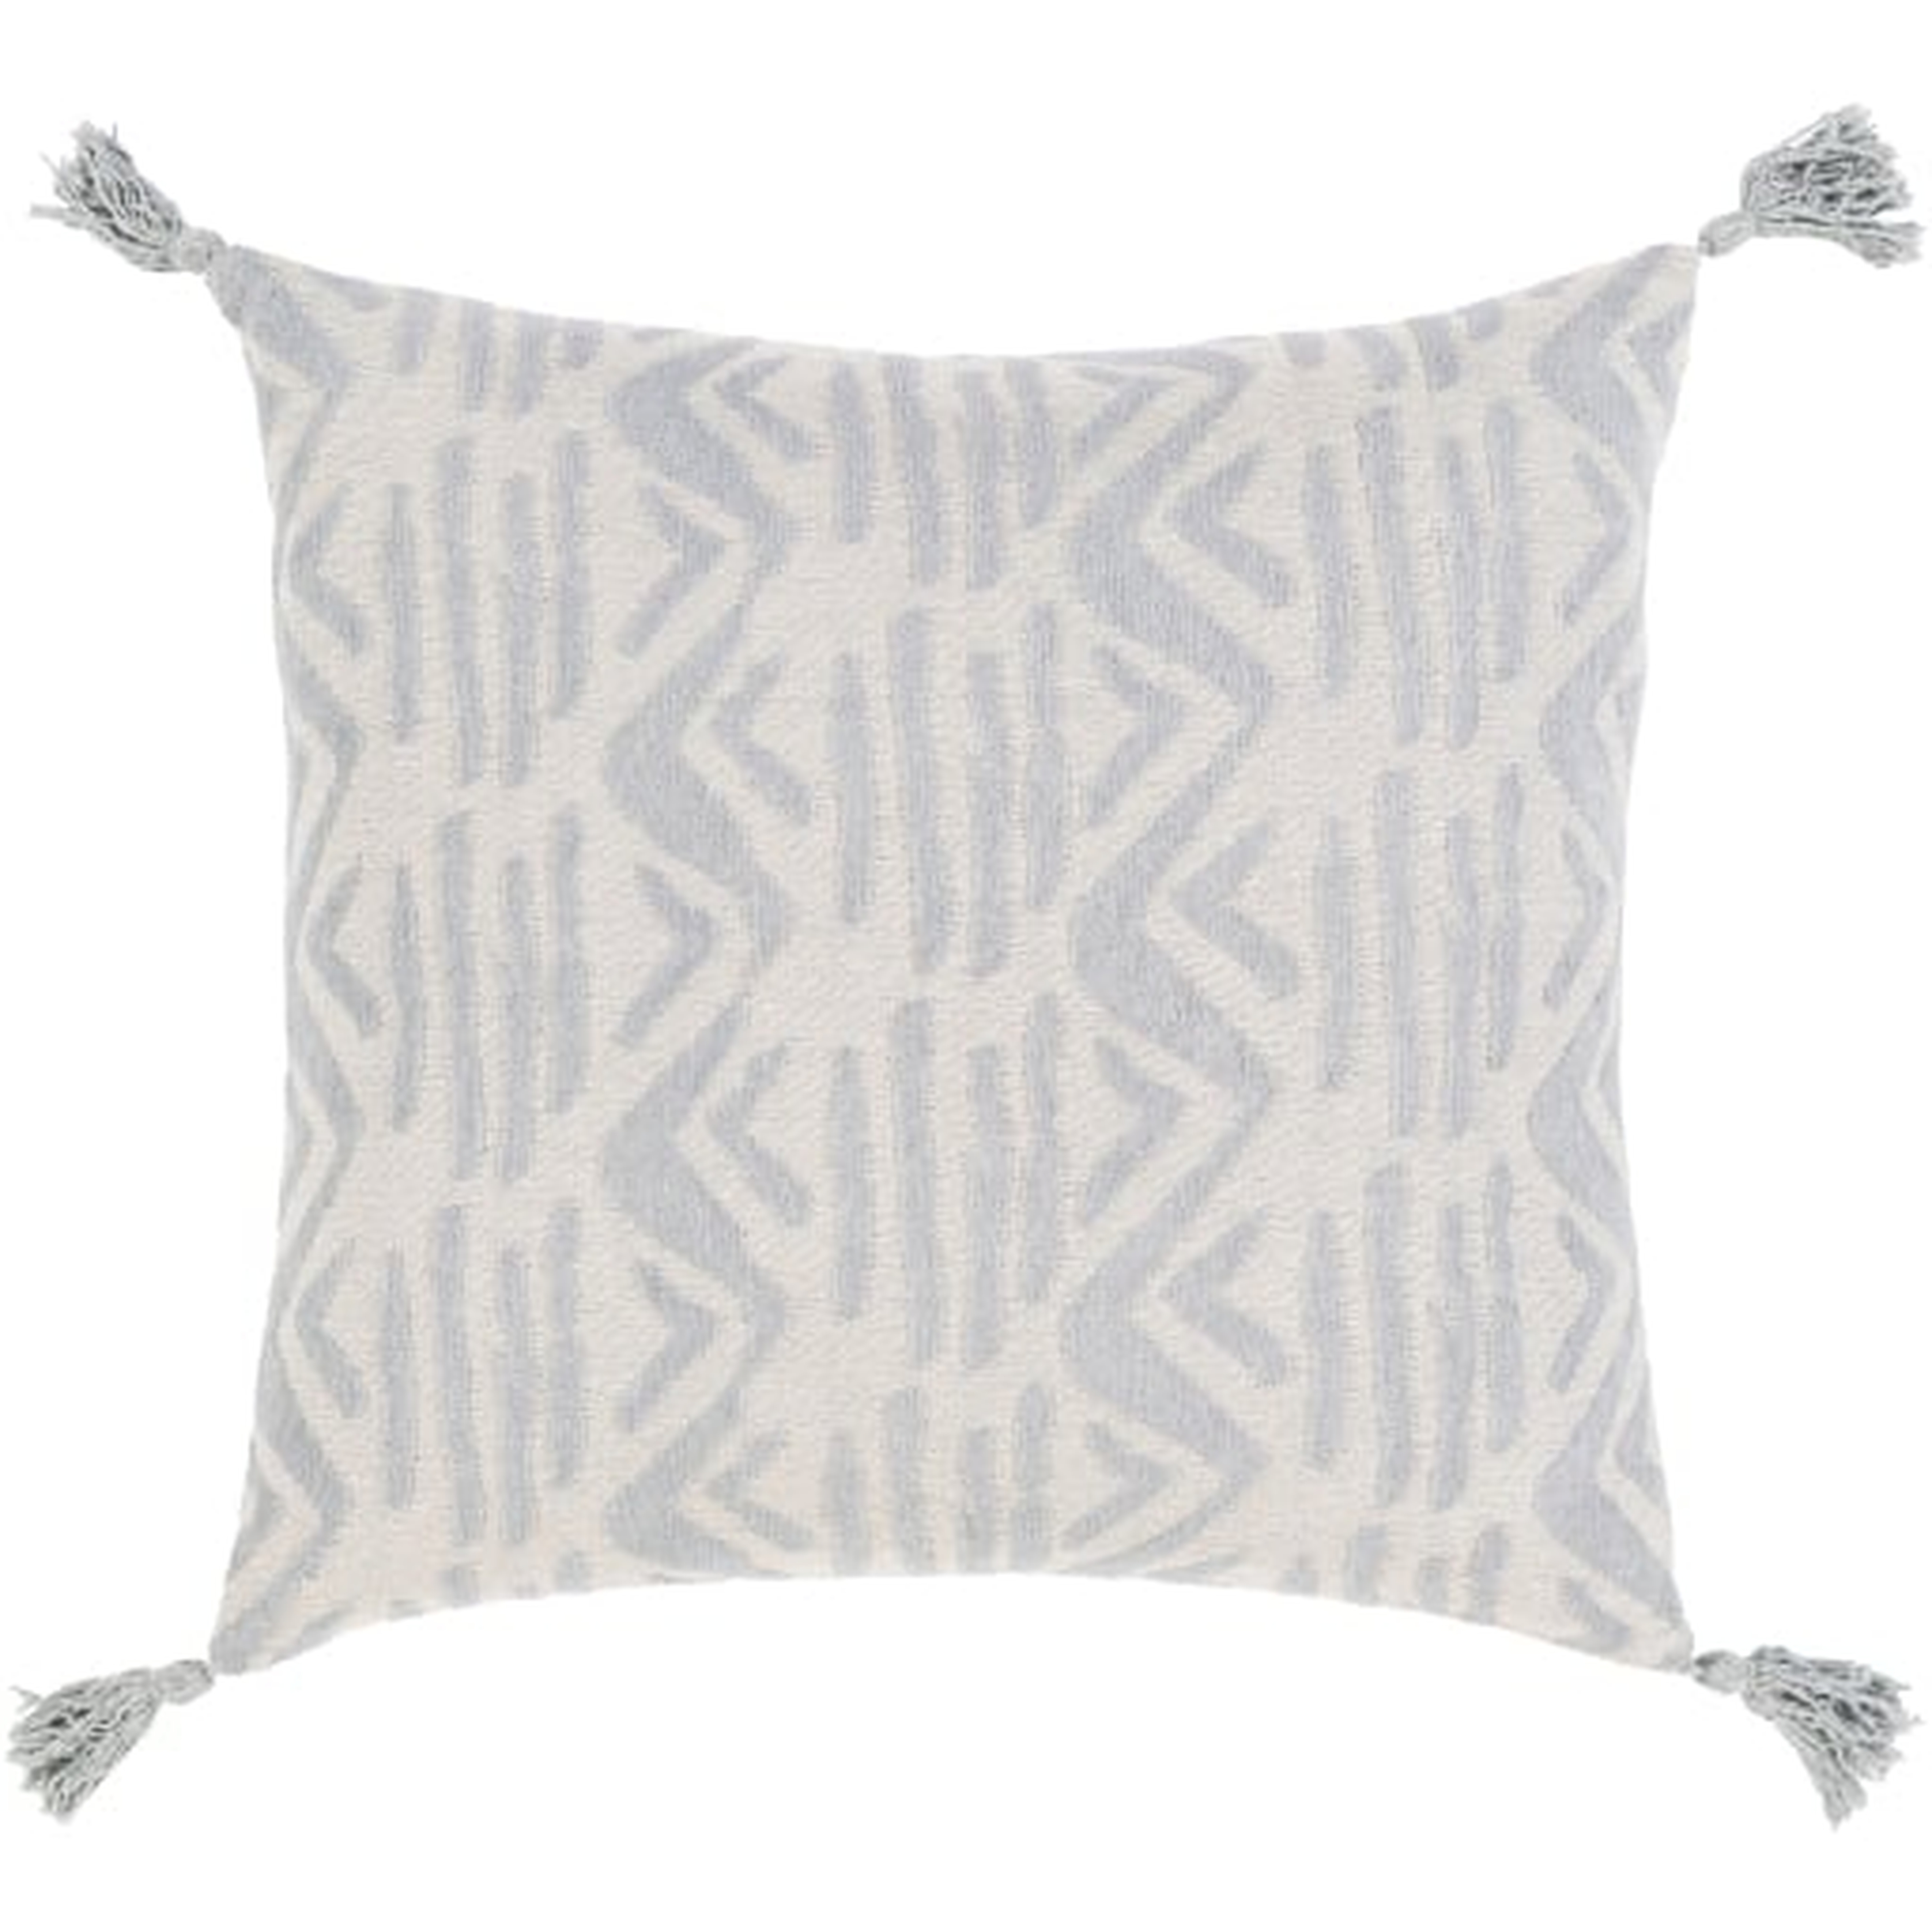 Hadlee Dash Pillow Cover, 18"x 18", Gray - Cove Goods